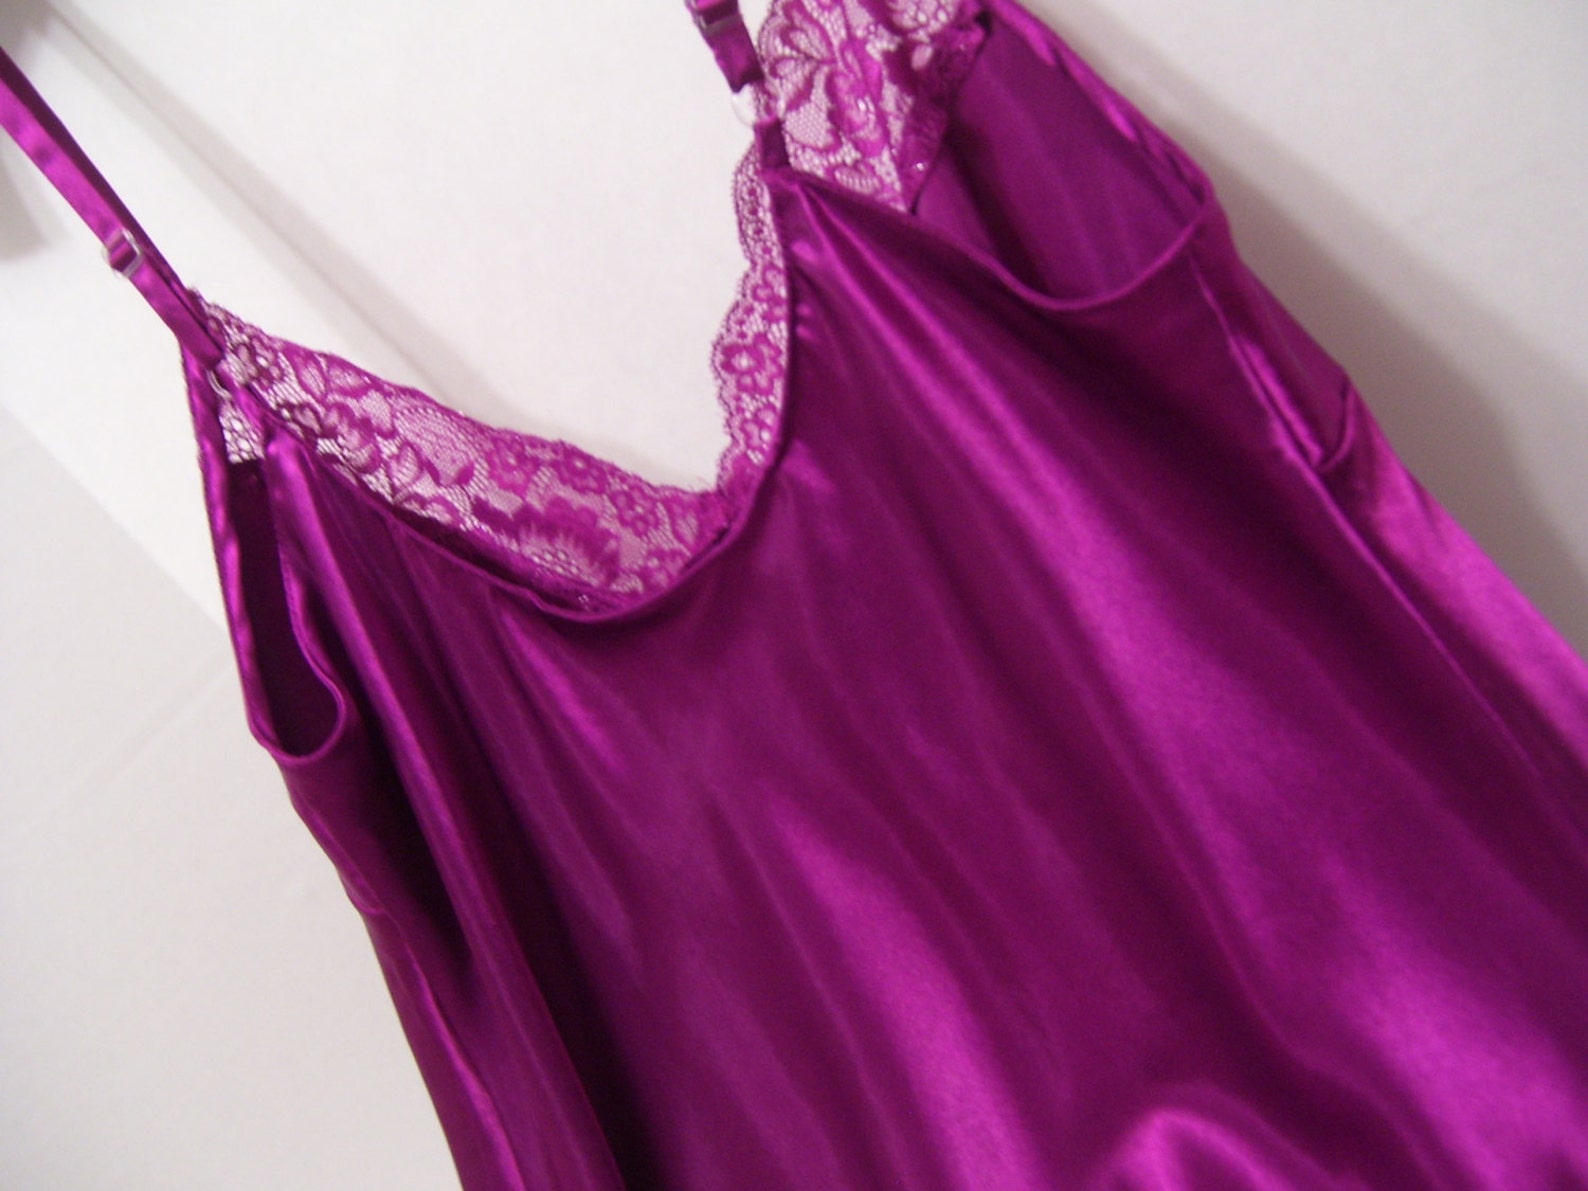 Night Gown Chemise Liquid Satin Raspberry Rose Pink Lace - Etsy